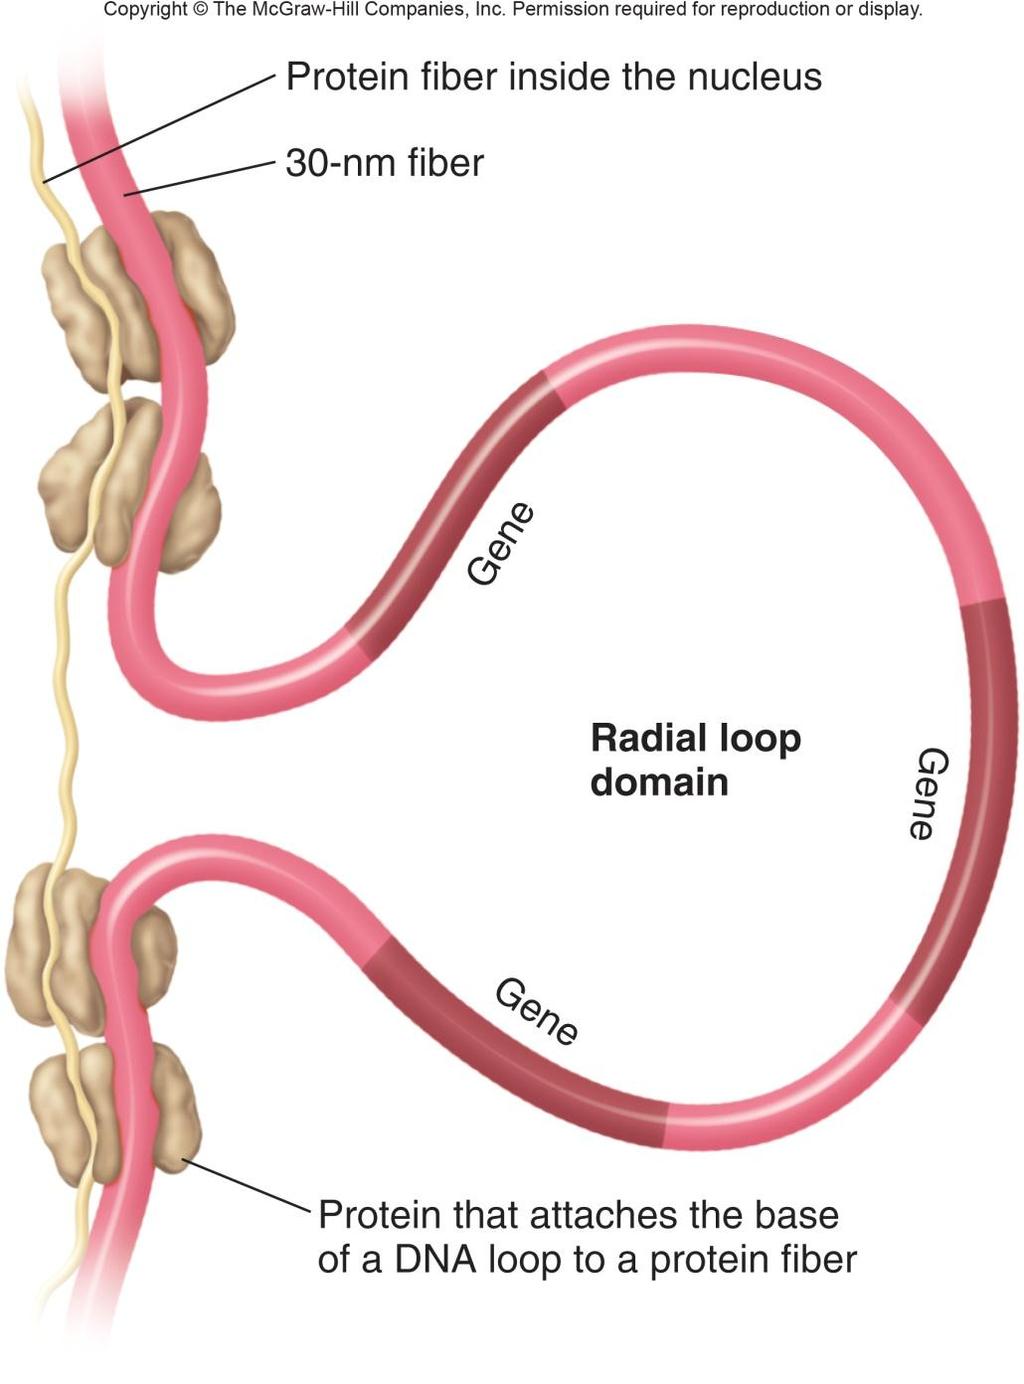 3. Radial loop domains Interaction between 30-nm fibers and nuclear matrix Each chromosome located